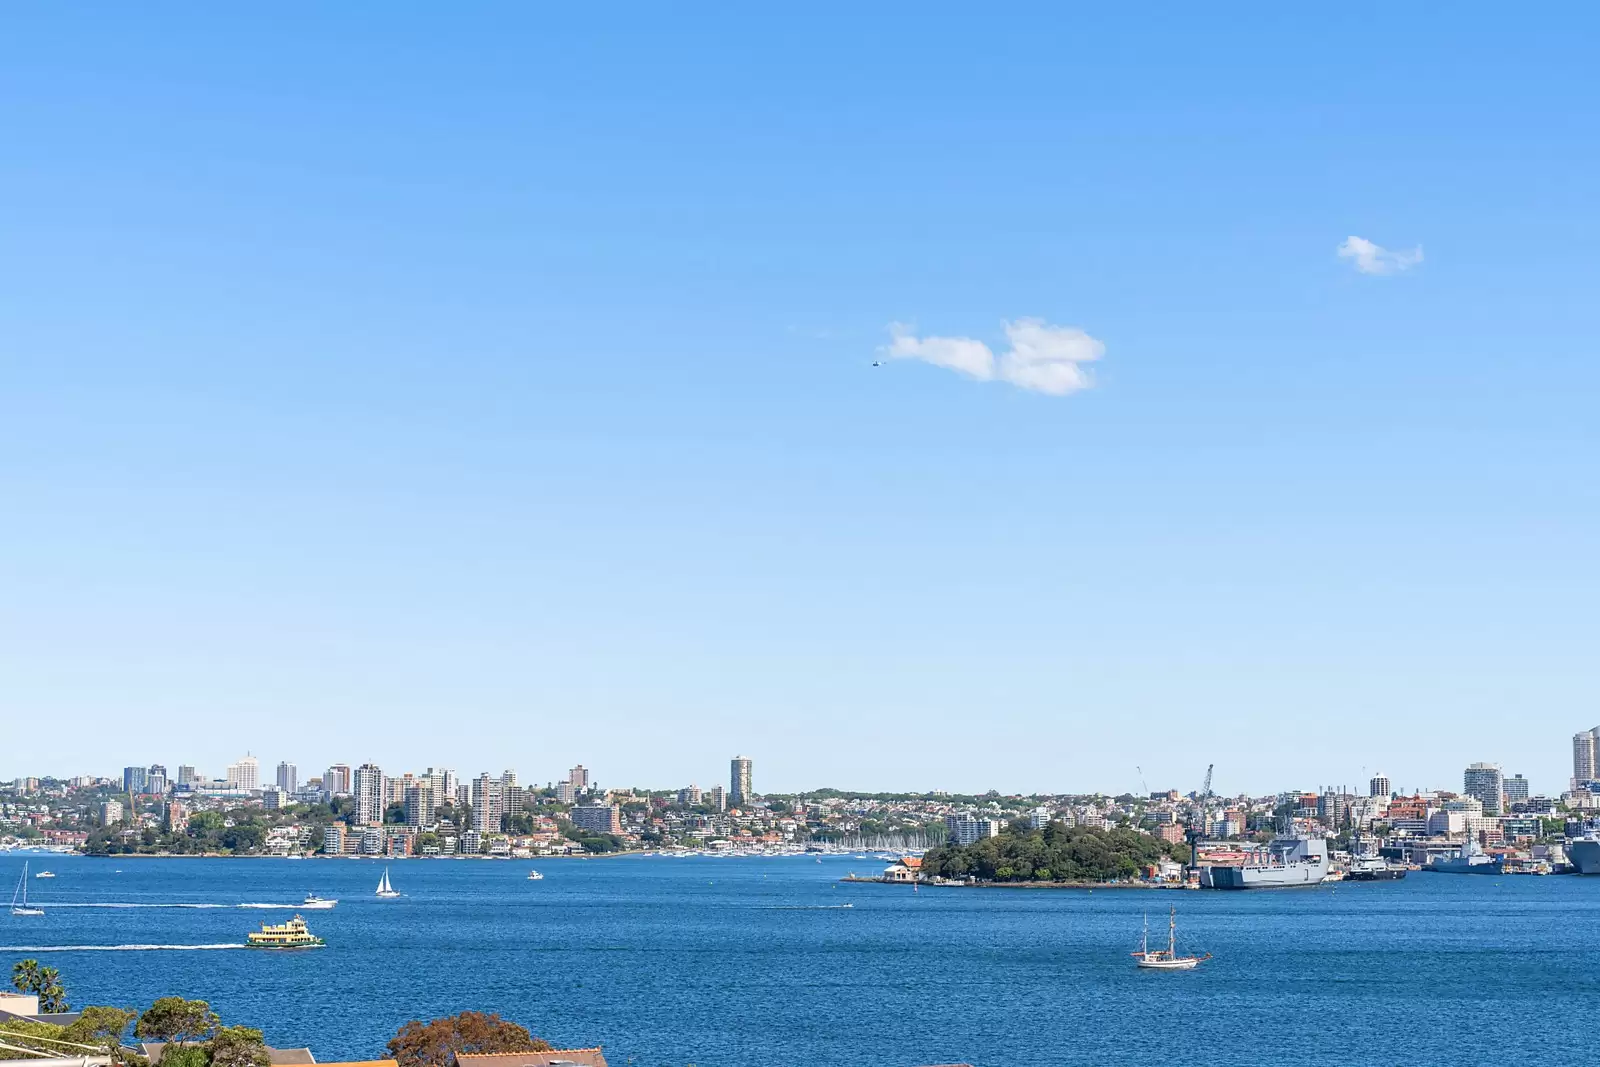 Photo #18: 29 Milson Road, Cremorne Point - Sold by Sydney Sotheby's International Realty